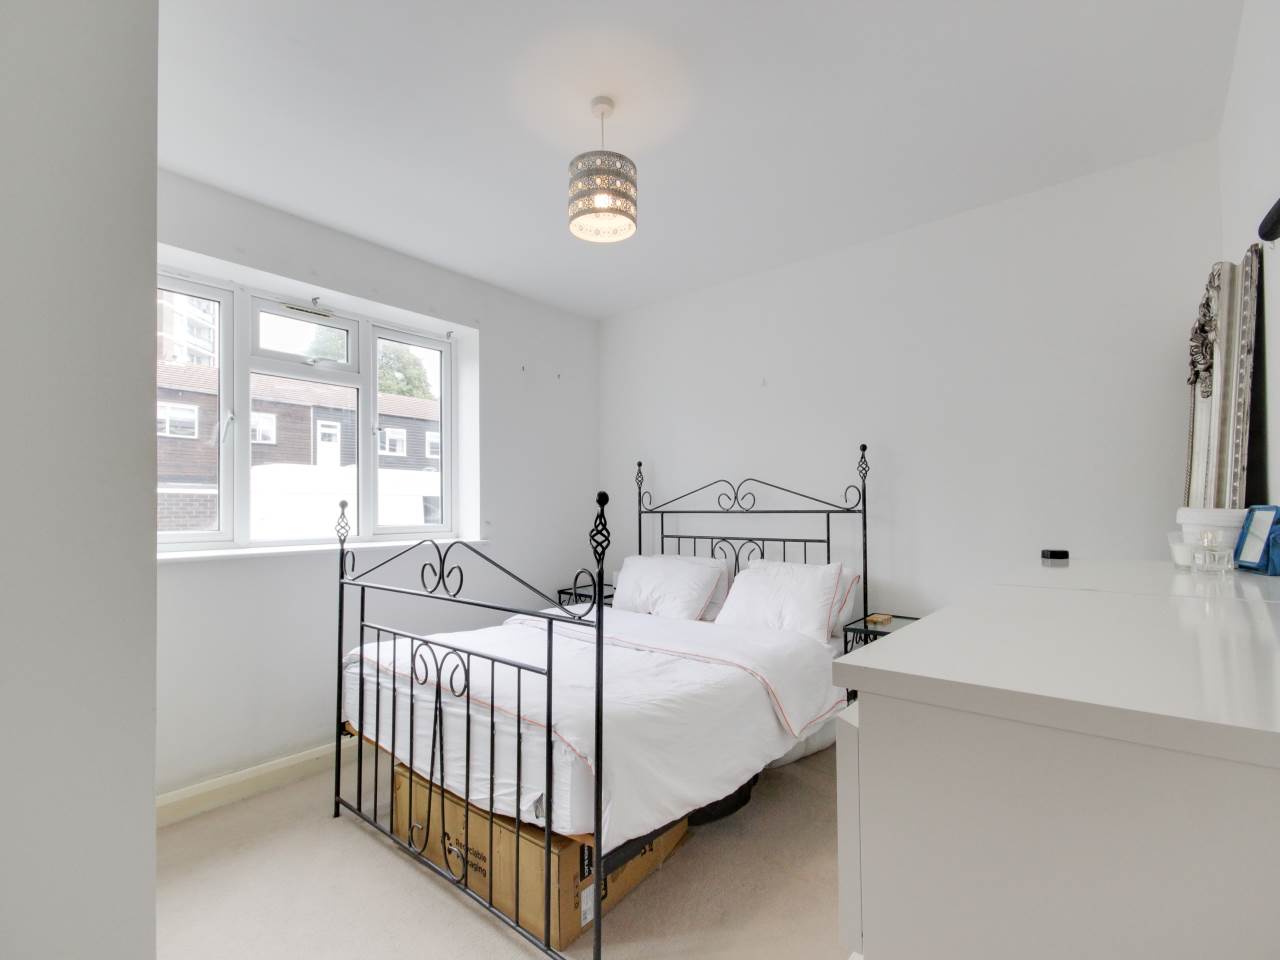 2 bed flat for sale in Wanti Terrace , Chigwell   - Property Image 9